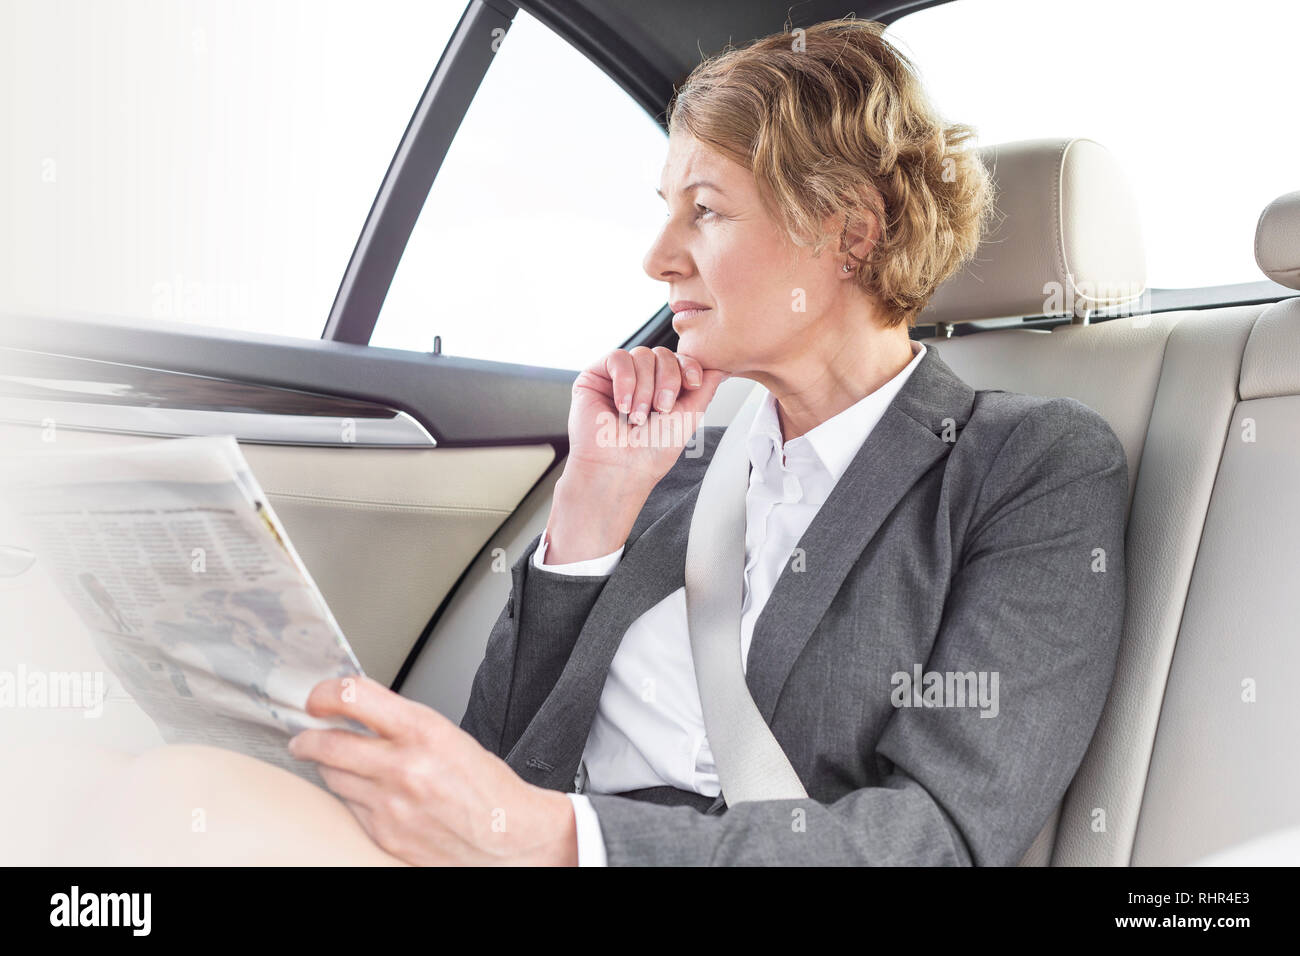 Thoughtful businesswoman with newspaper sitting in car Stock Photo